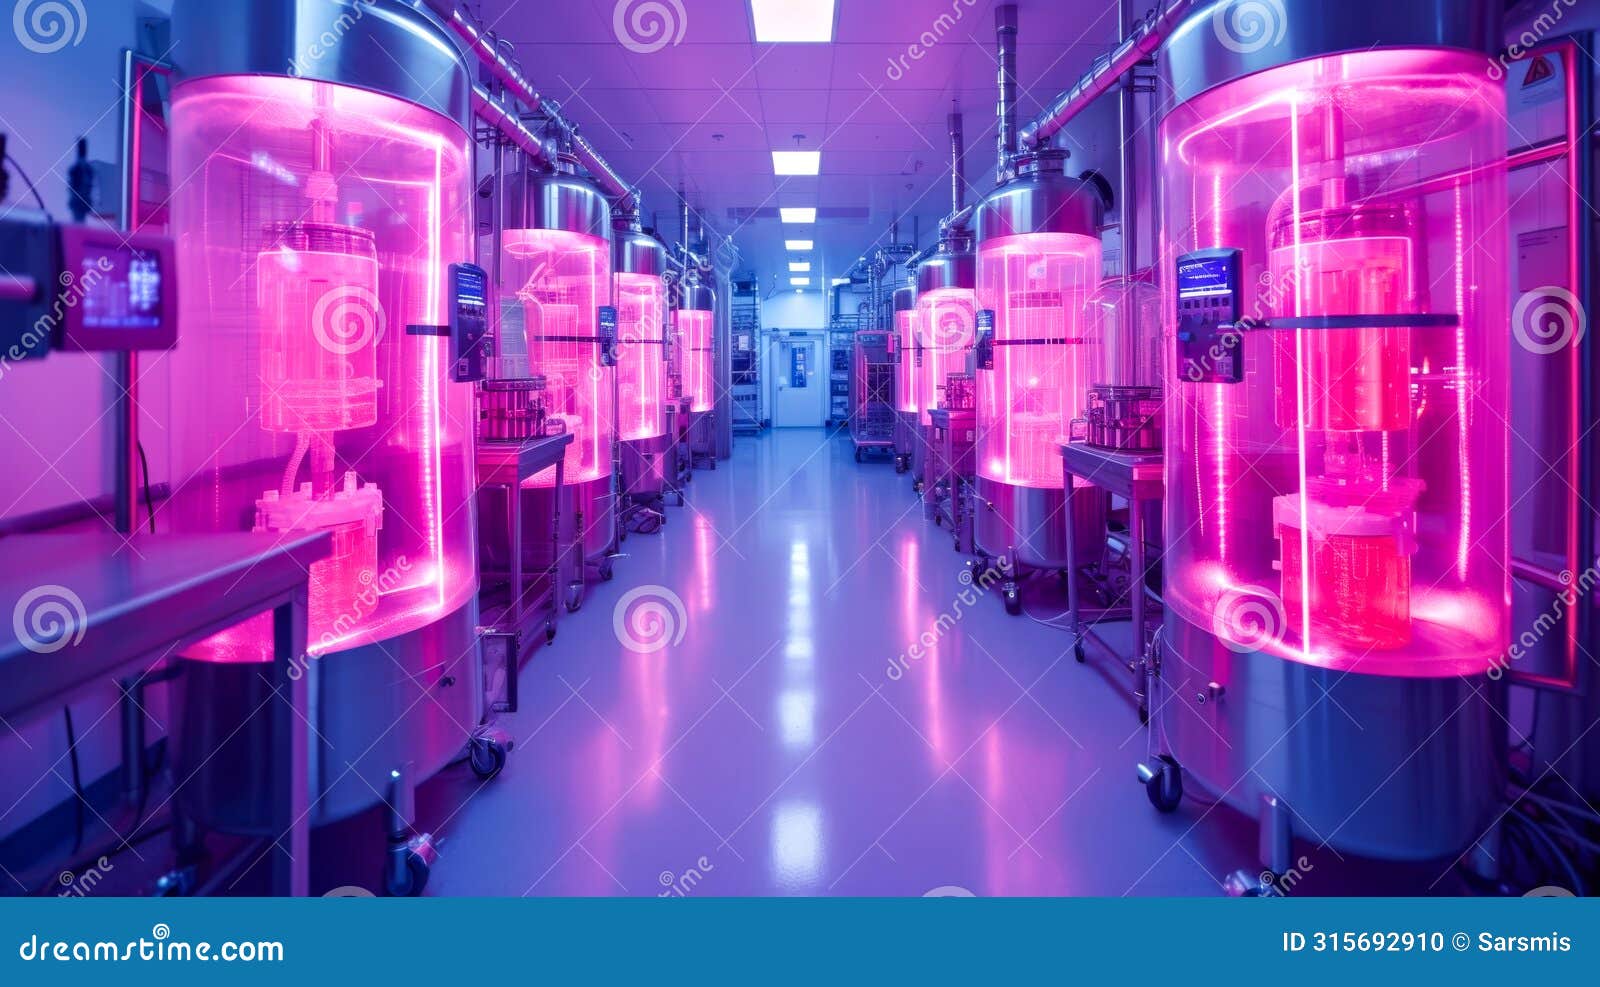 advanced cryogenic storage system with illuminated chambers in a tech facility. cryogenic chambers for freezing bodies